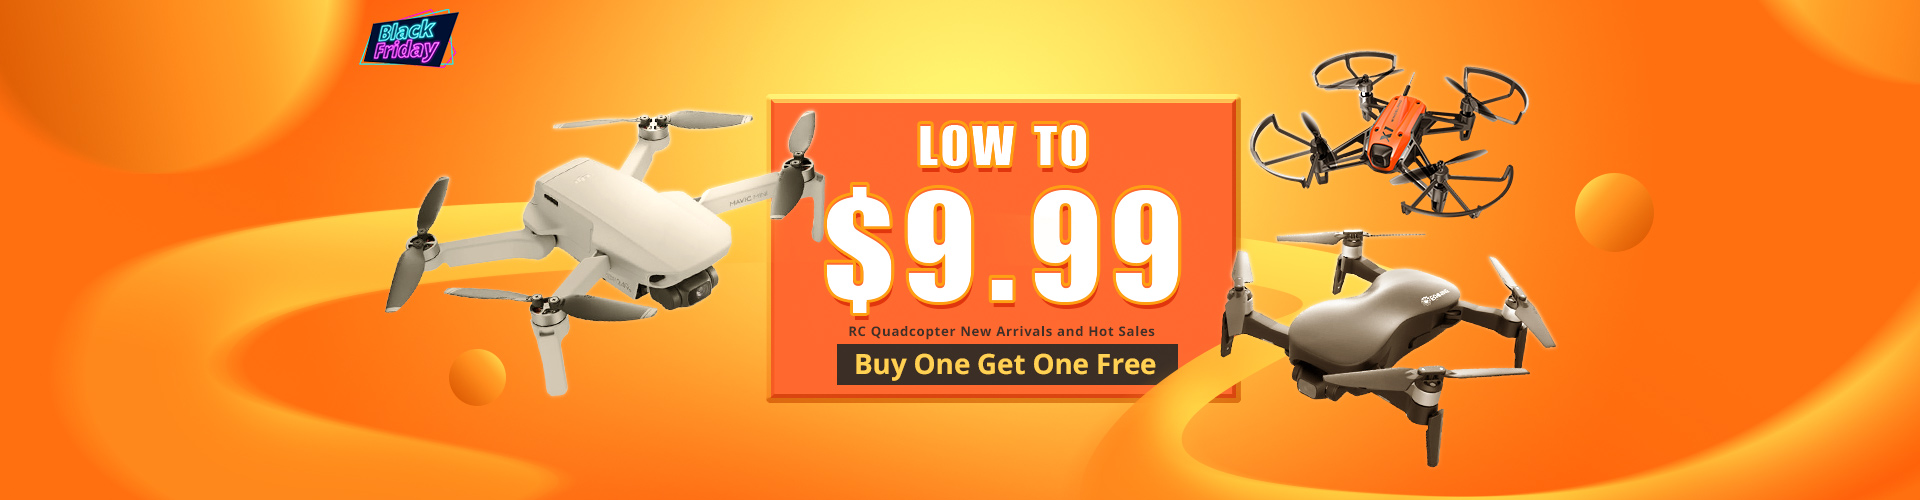 RC Quadcopter New Arrivals and Hot Sales